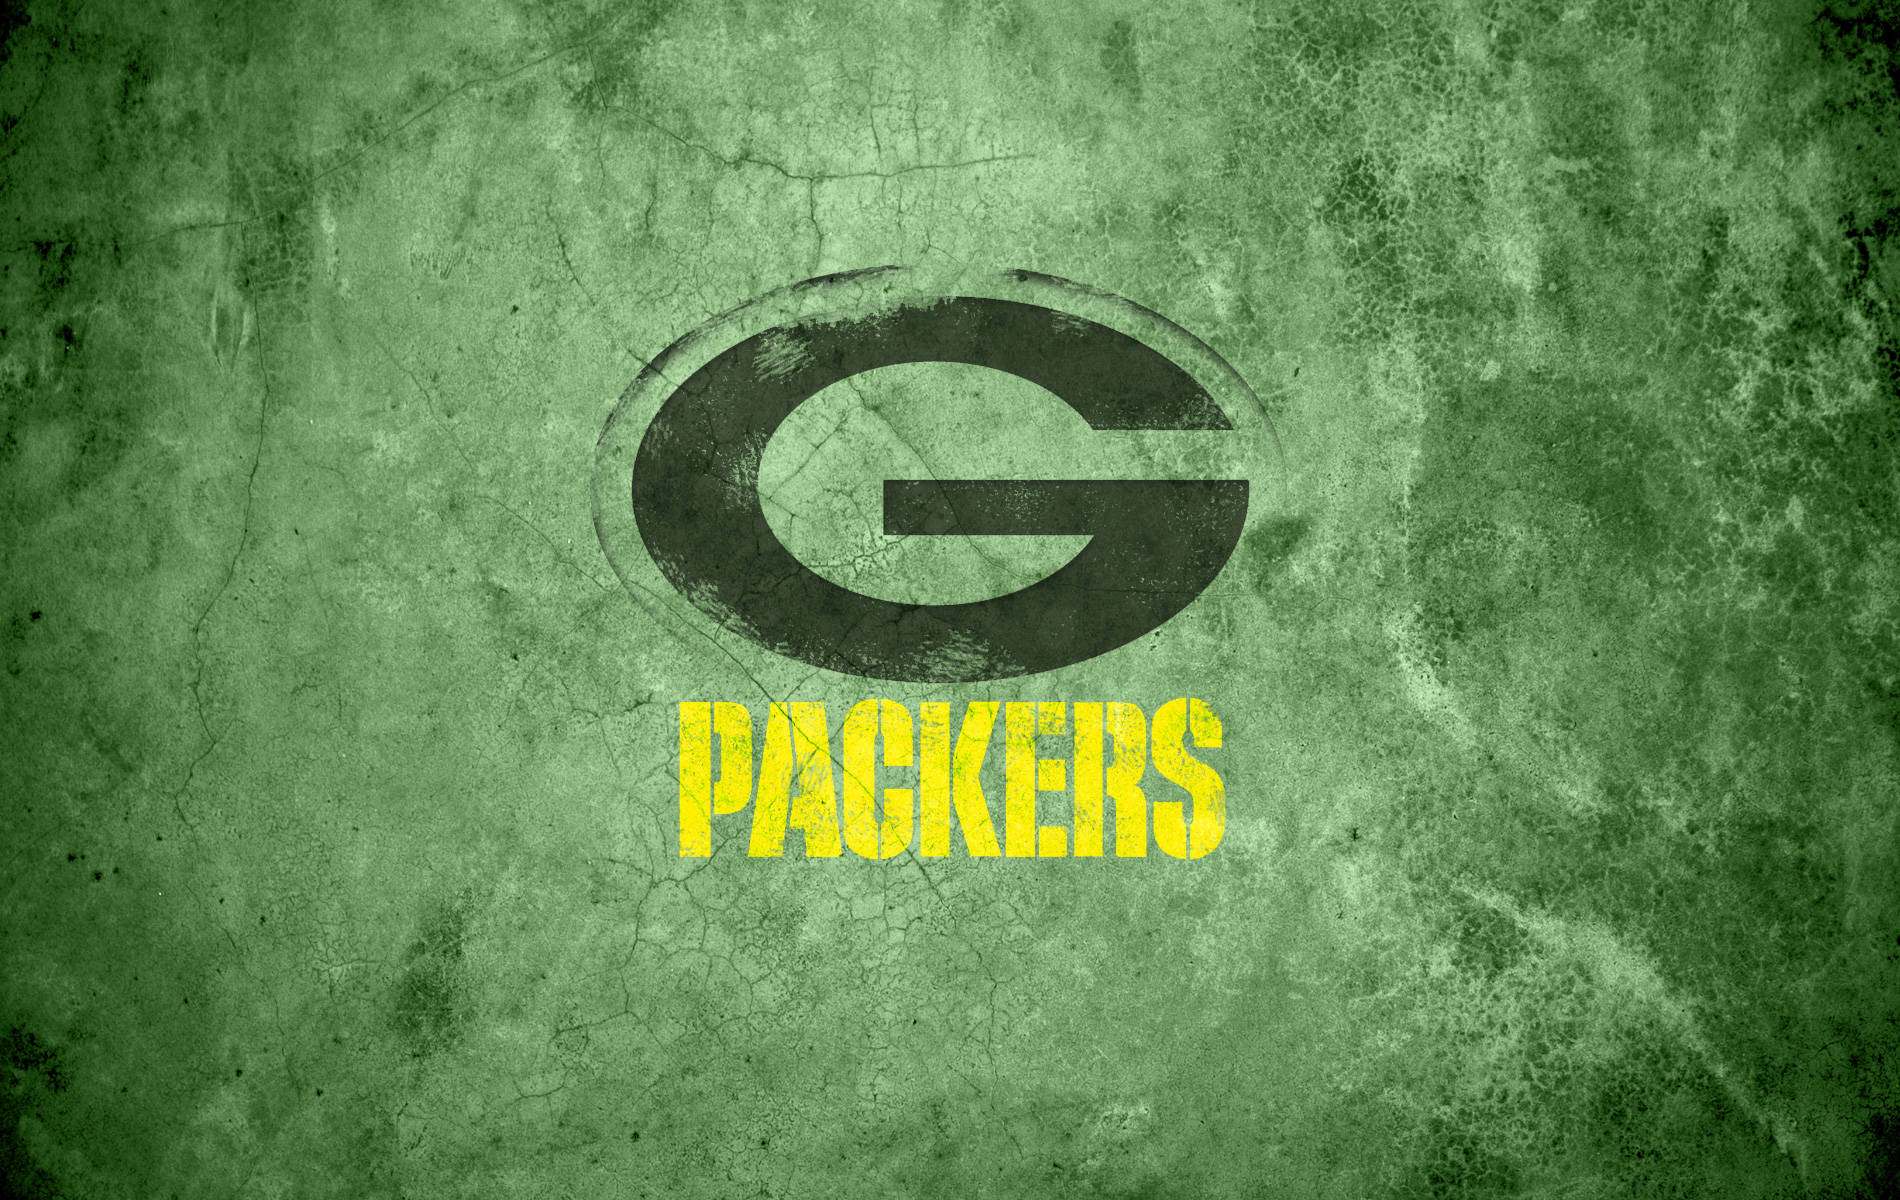 Green Bay Packers wallpaper 345201987 cute Backgrounds